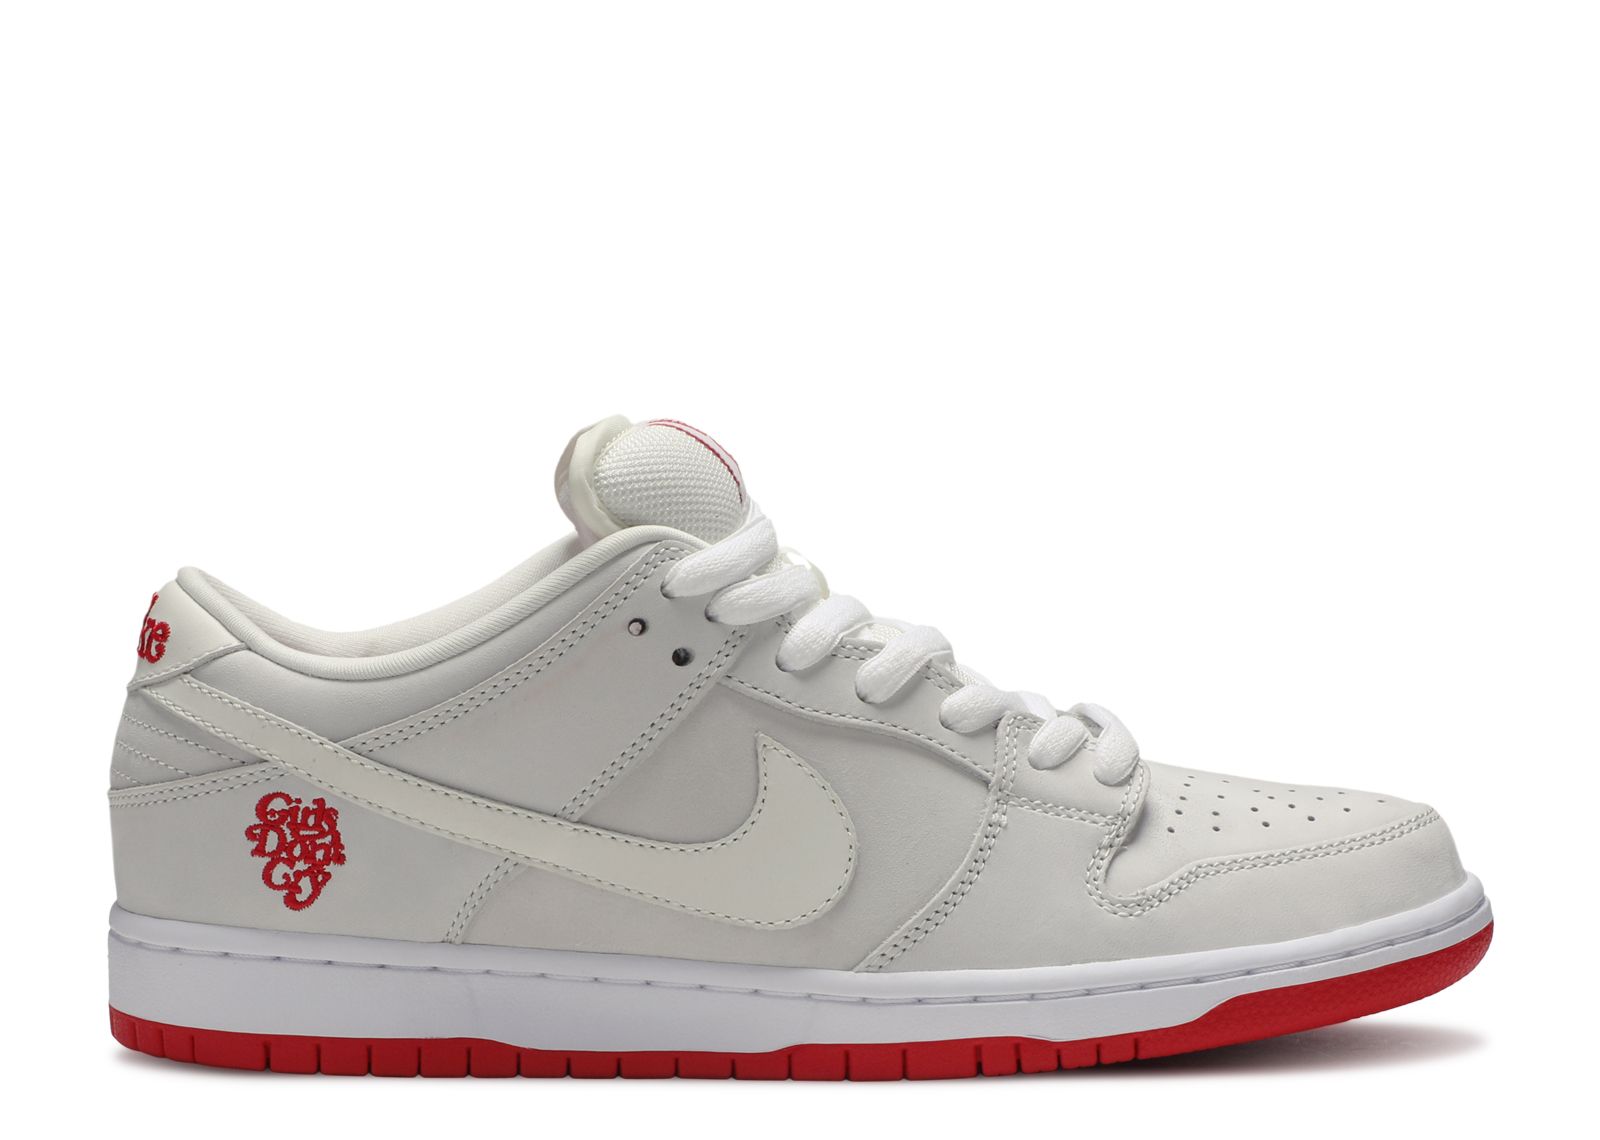 Girls Don't Cry X Dunk Low Pro SB QS 'Friends & Family' - Nike 